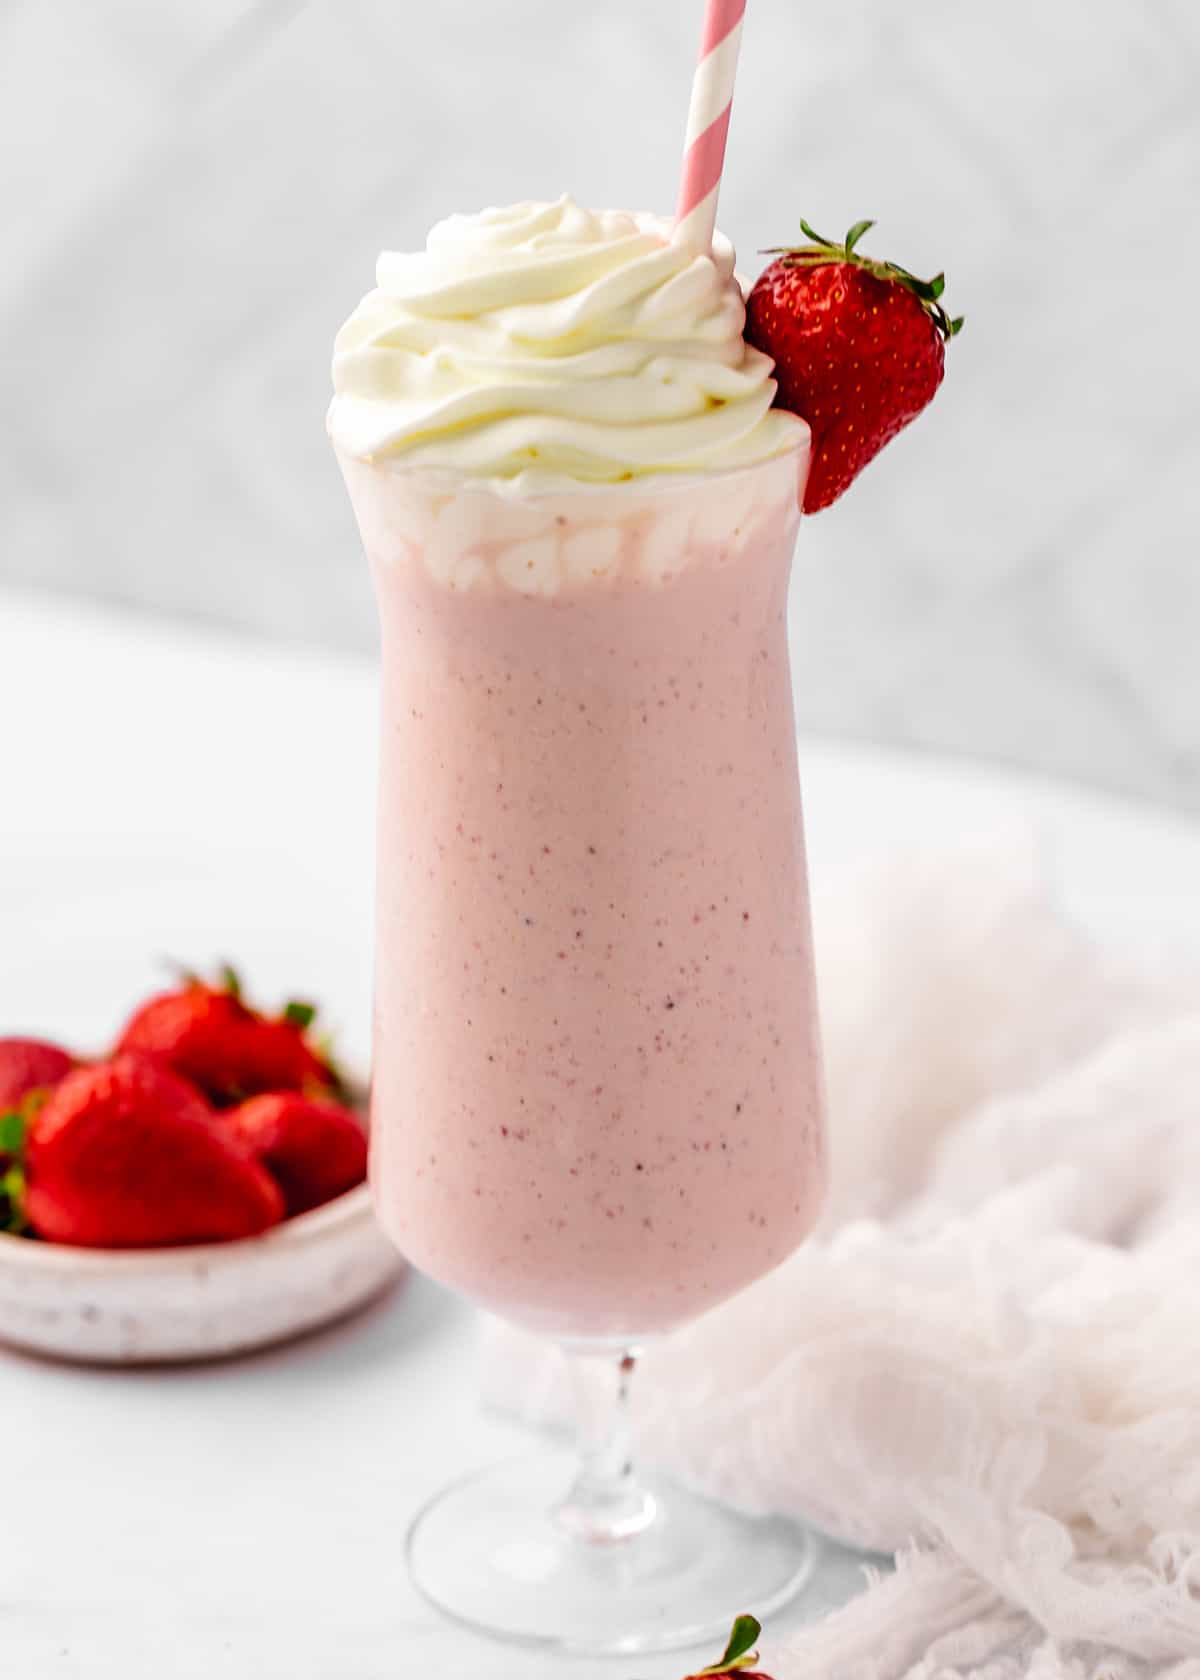 Strawberry Milkshake in a glass topped with whipped cream